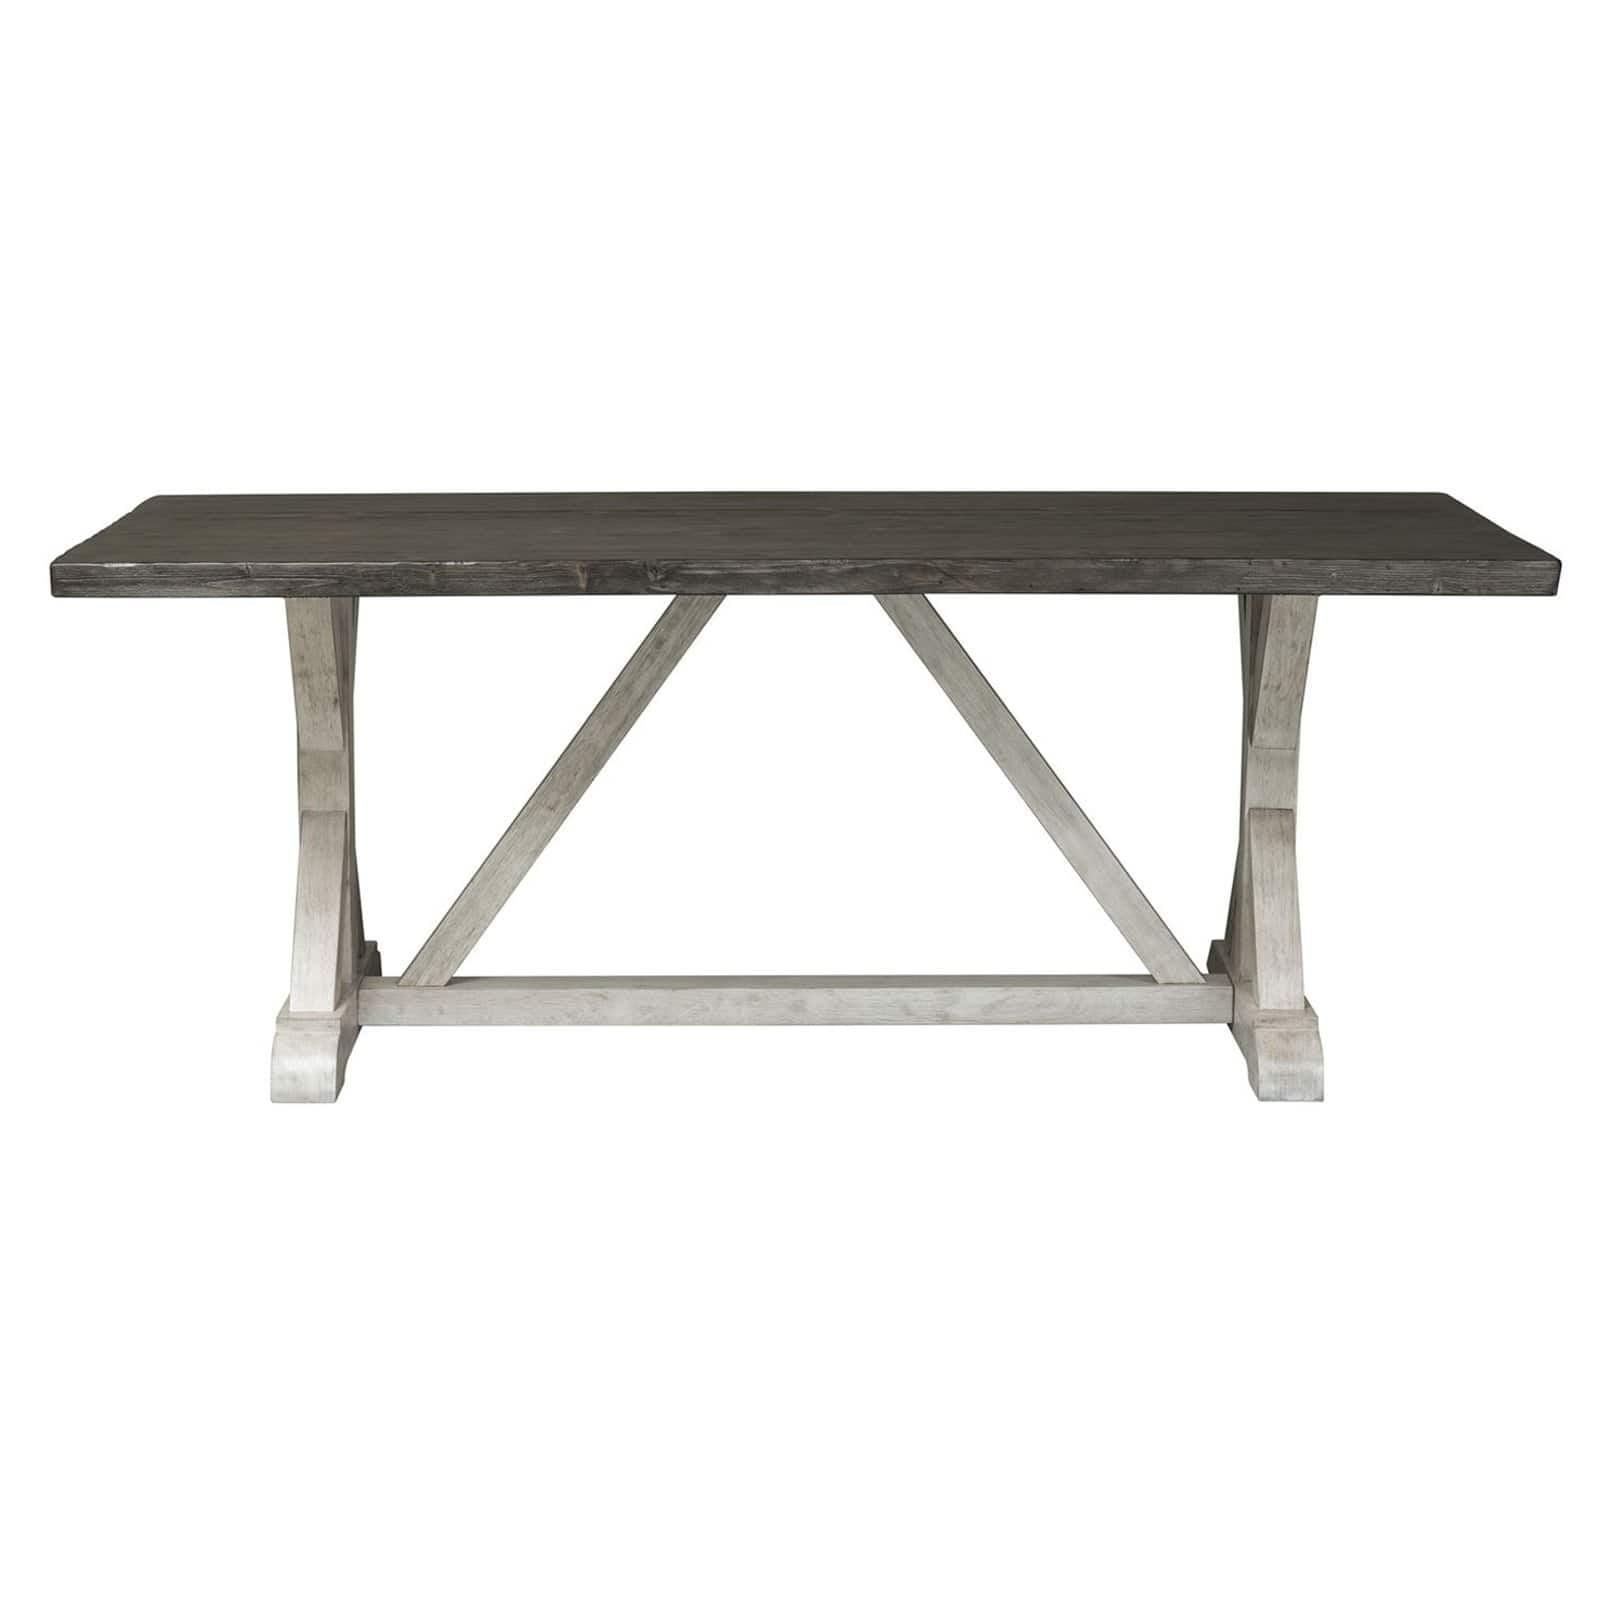 Rustic White and Charcoal Reclaimed Wood Rectangular Dining Table